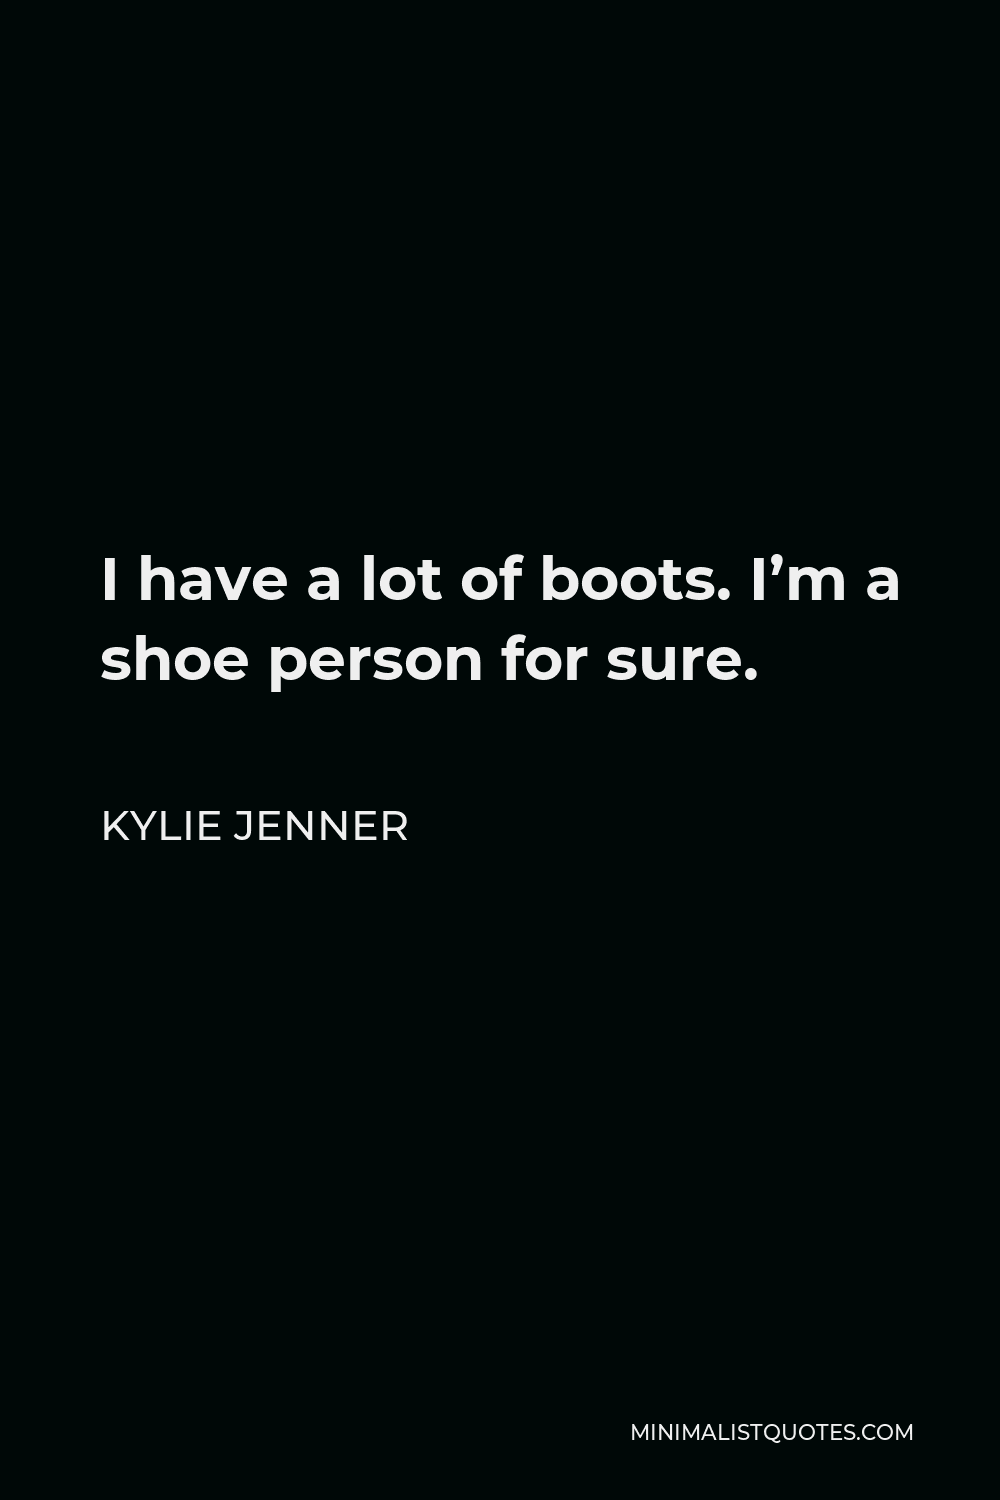 Kylie Jenner Quote - I have a lot of boots. I’m a shoe person for sure.